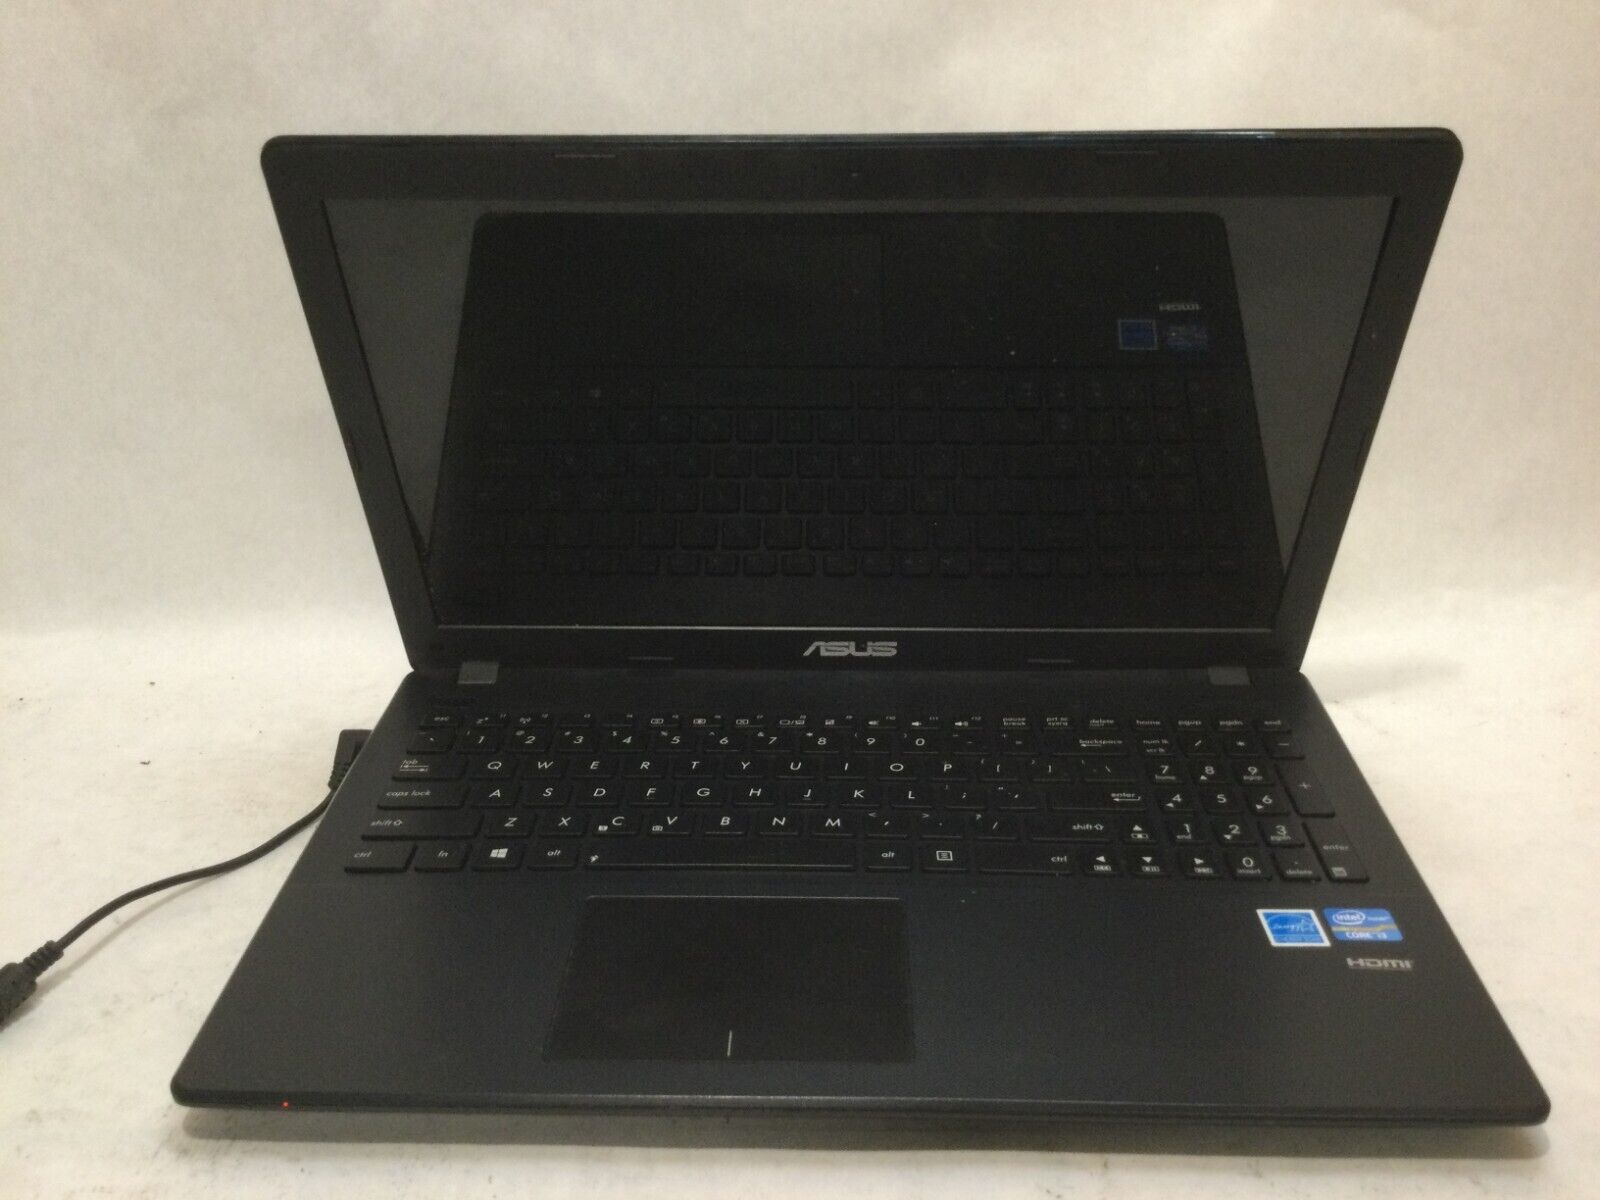 ASUS X551C 15.6” / Intel Core i3 UNKNOWN SPECS / (RECEIVES POWER) MR